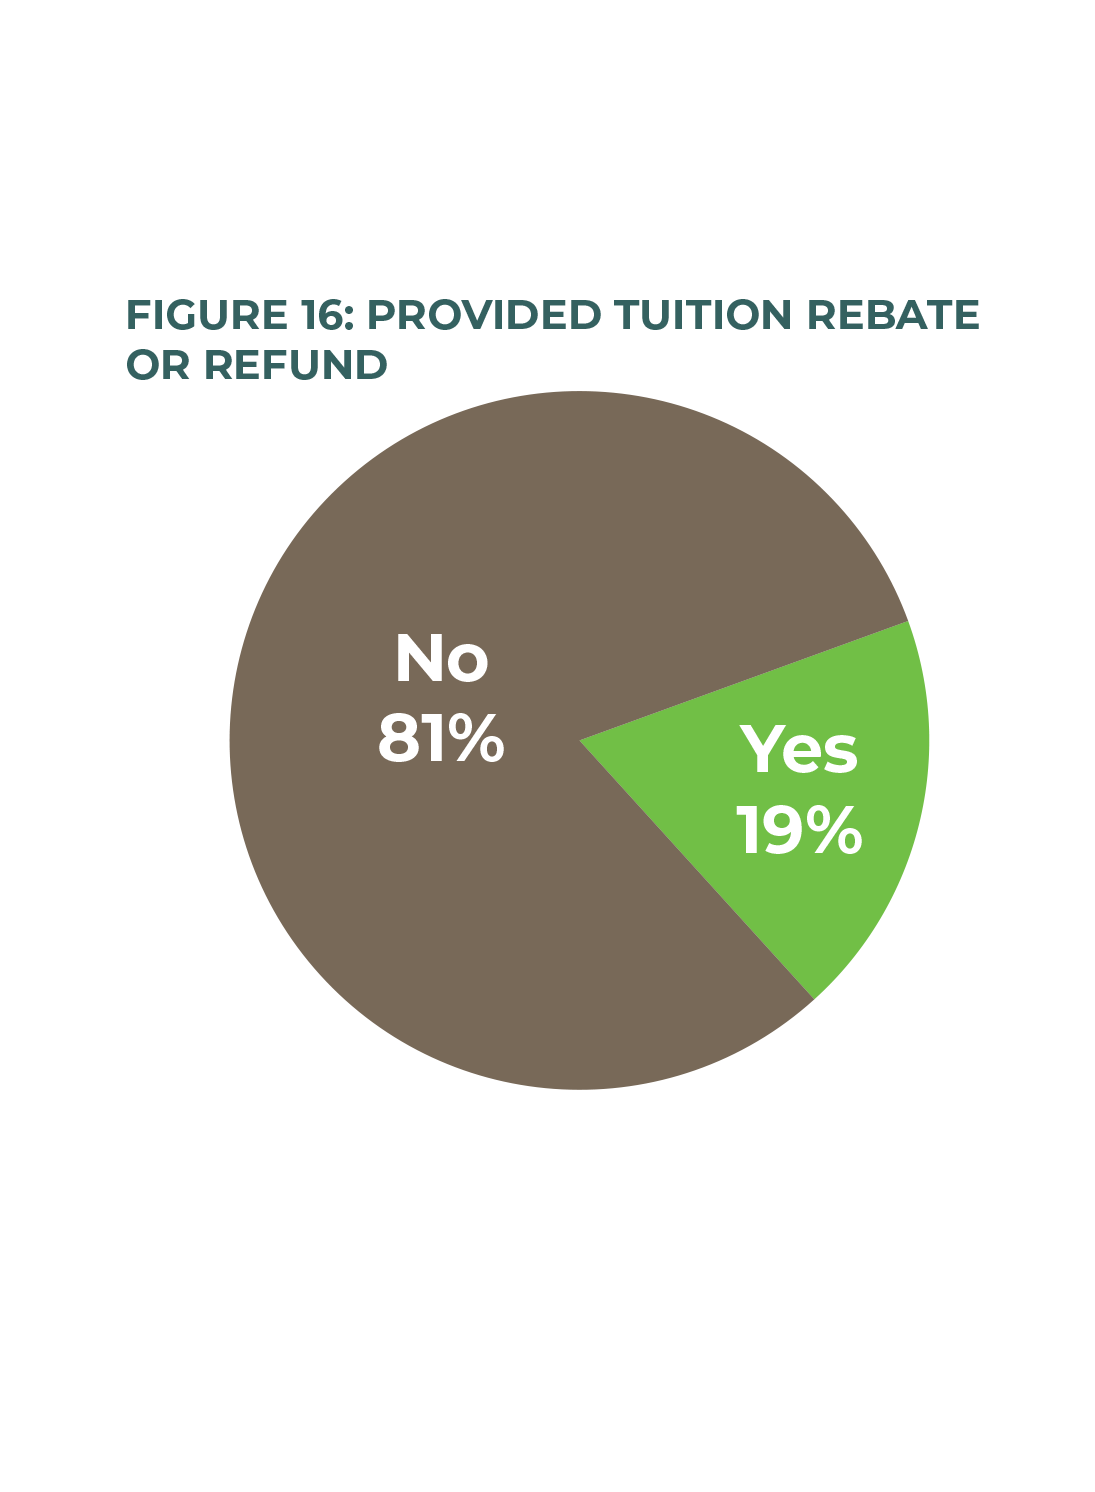 Figure 16: Provided tuition rebate or refund